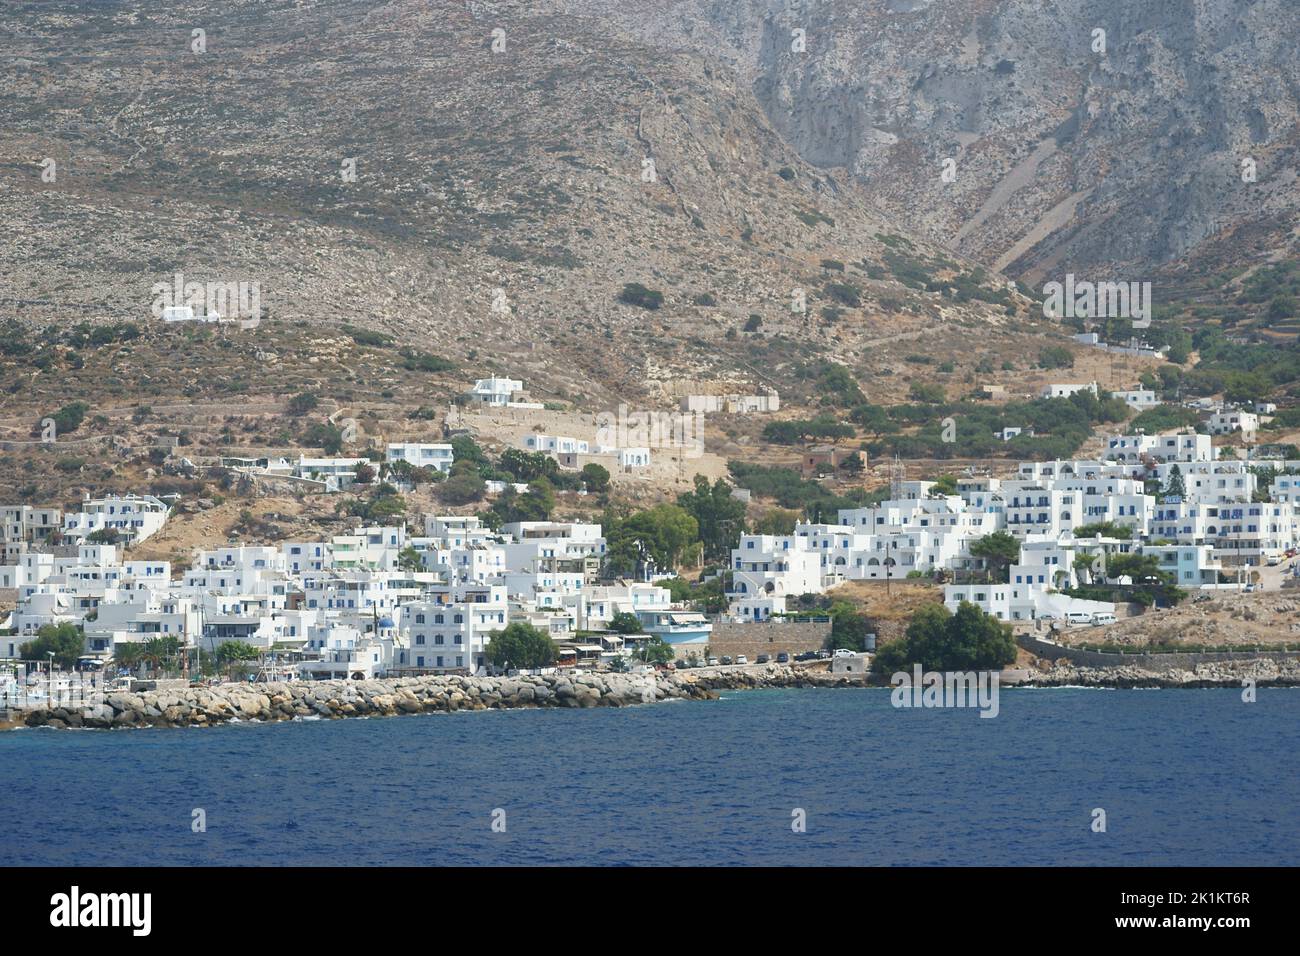 Aigiali town and harbour, Amorgos, Cyclades, Aegean, Greek Islands, Greece, Europe Stock Photo